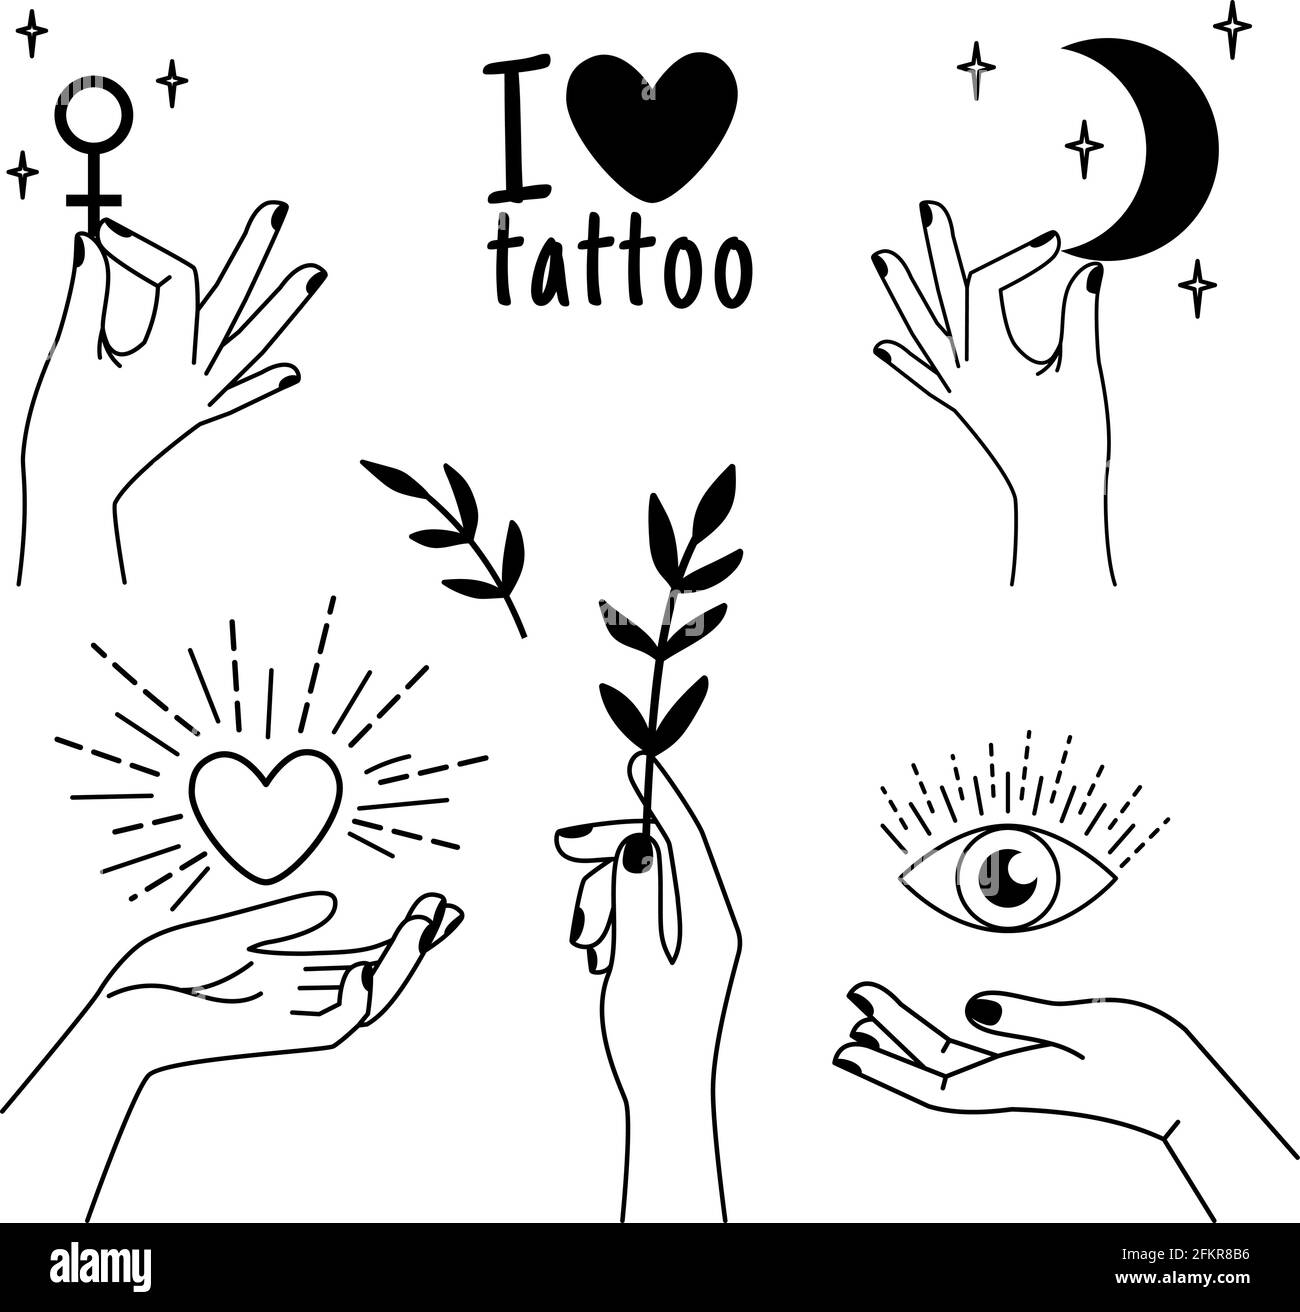 40 simple hand tattoos for girls  beautiful hand tattoos for women  small hand  tattoo for girls  YouTube